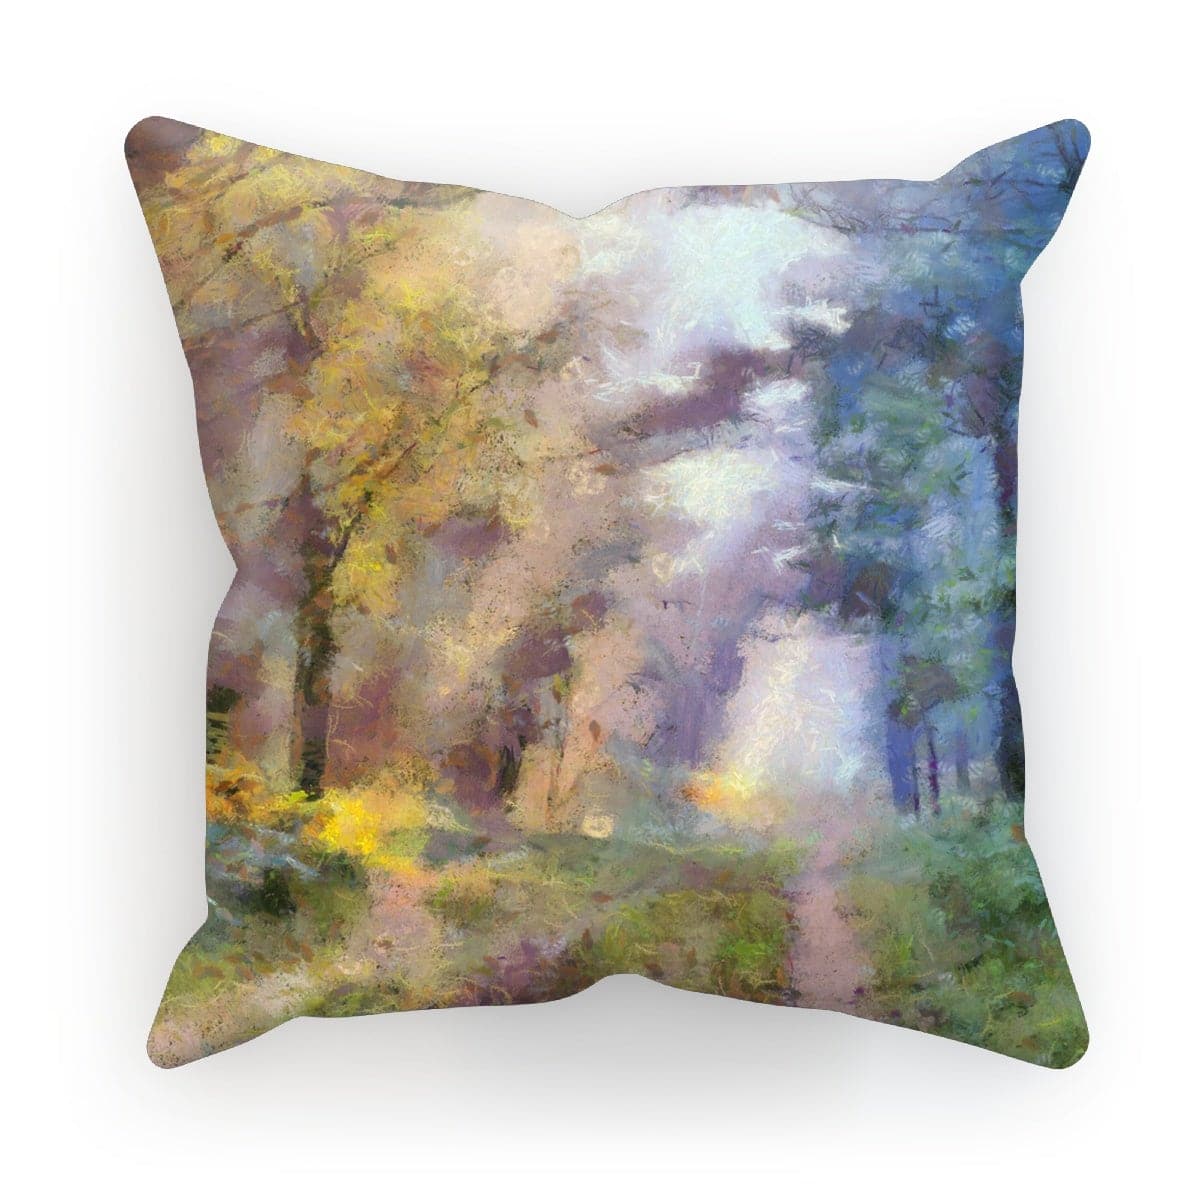 Early Morning Strole in the Woods Cushion